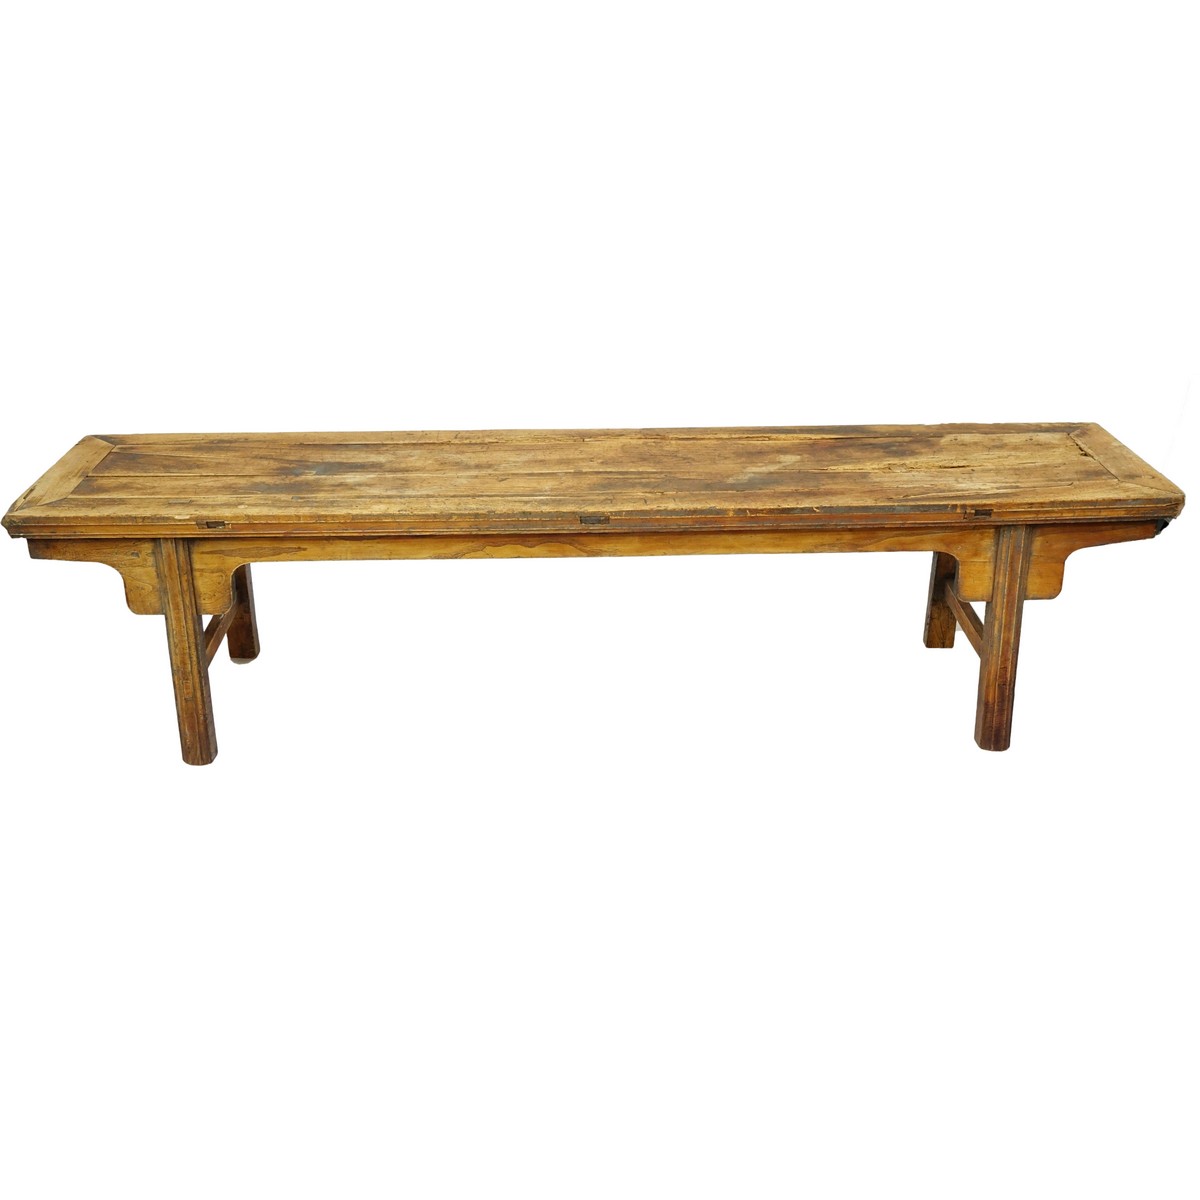 Large 19/20th Century Chinese Hardwood Bench. Wear to wood, scratches and scuffs to legs.